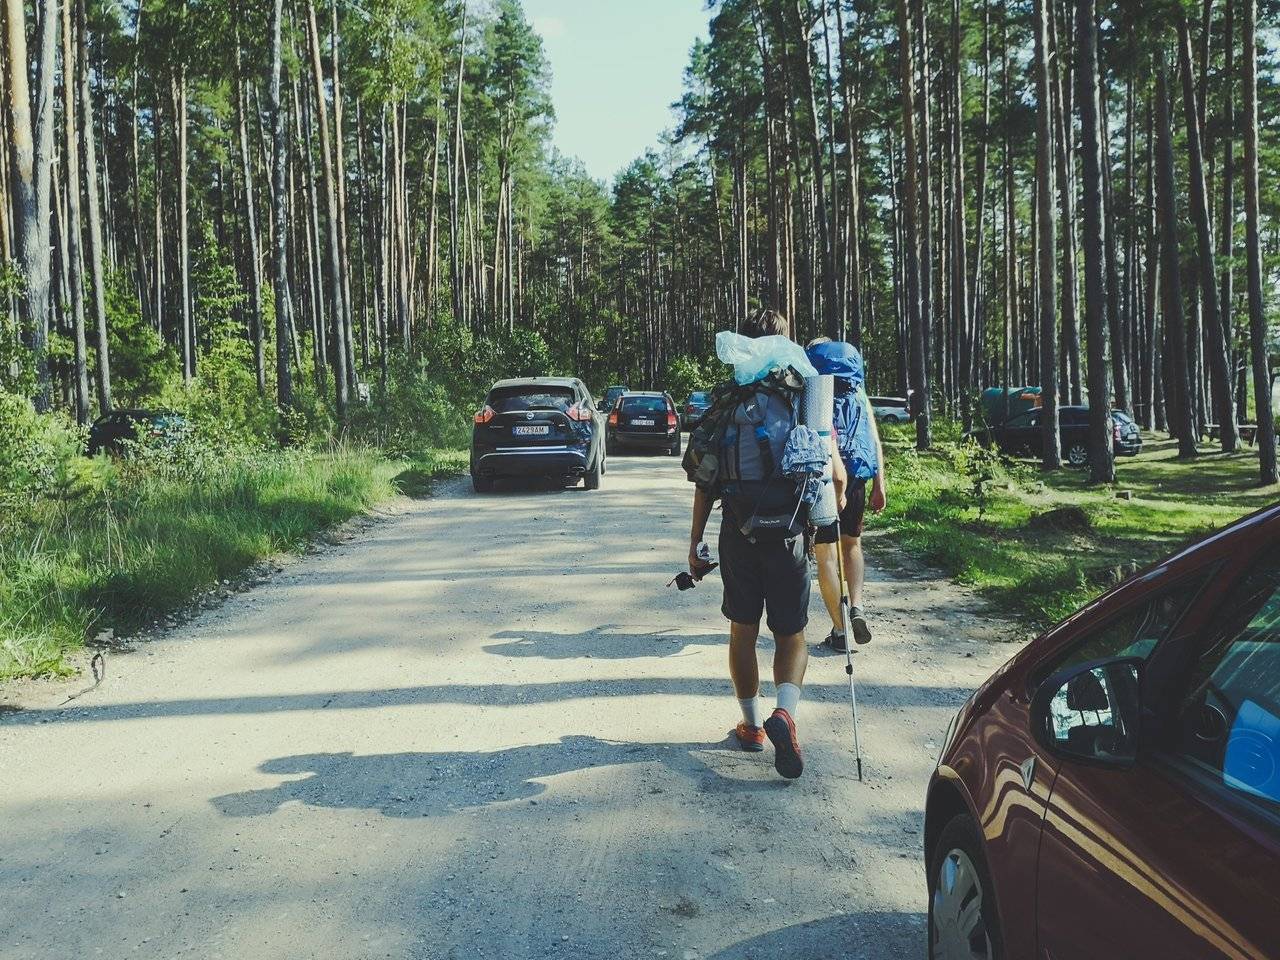   Trekking between cars in Labanoras Regional Park, Lithuania. Photo Alis Monte [CC BY-SA 4.0], via Connecting the Dots